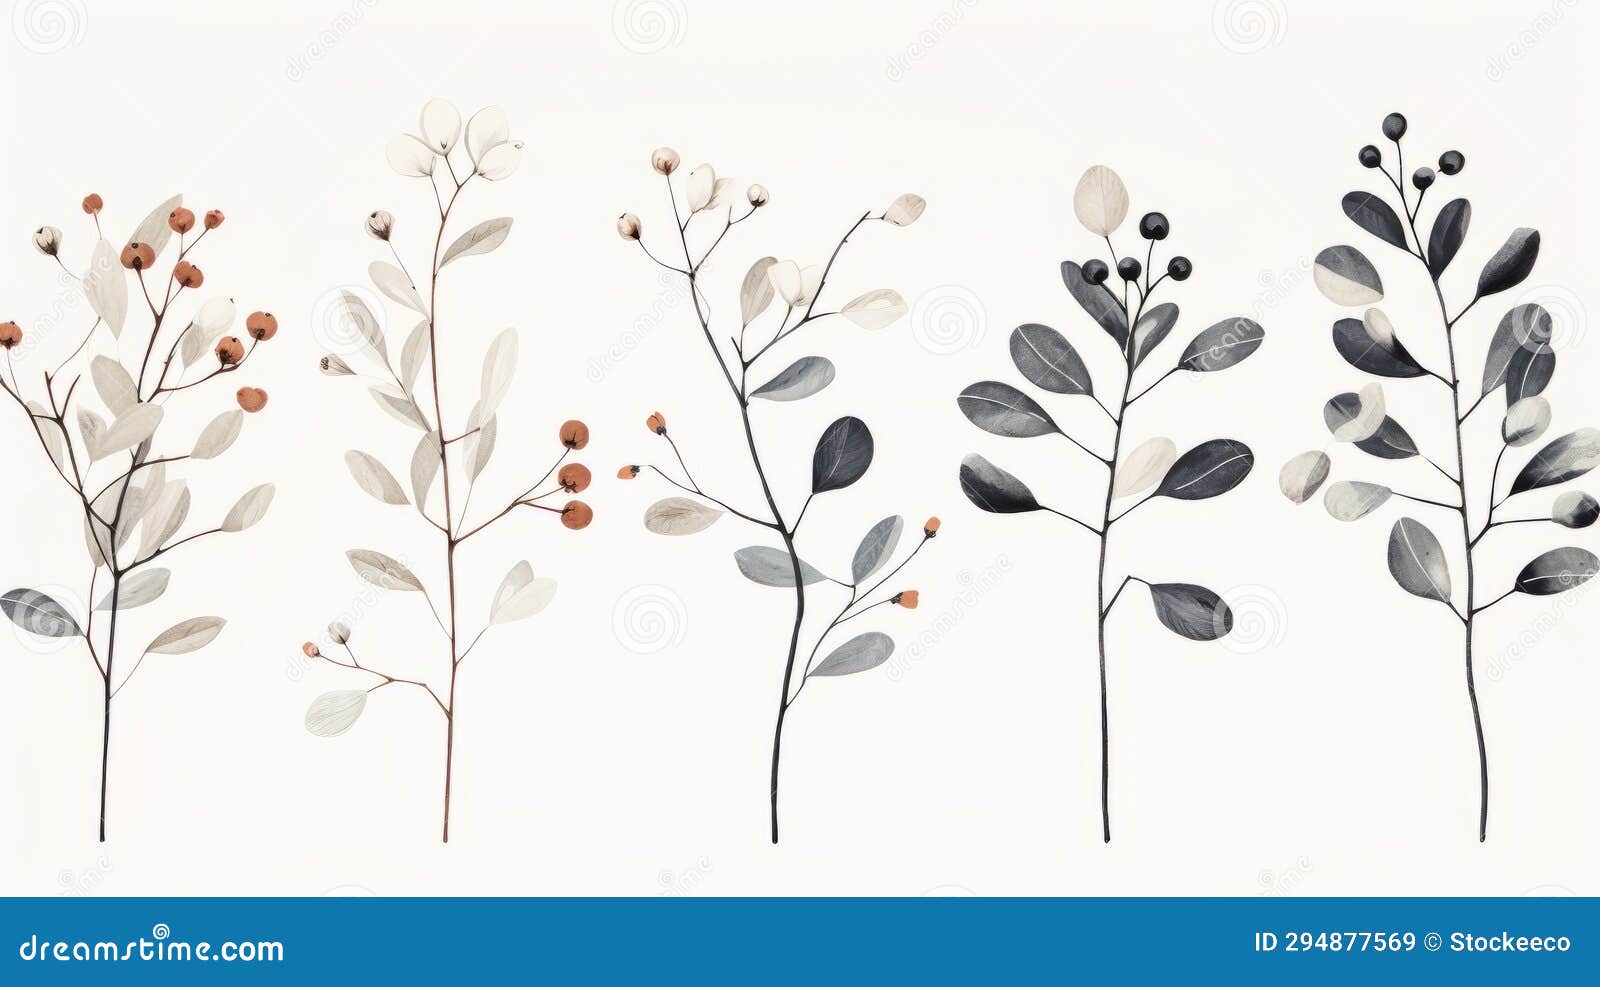 scandinavian style botanical poster: watercolor set of branches and fruits